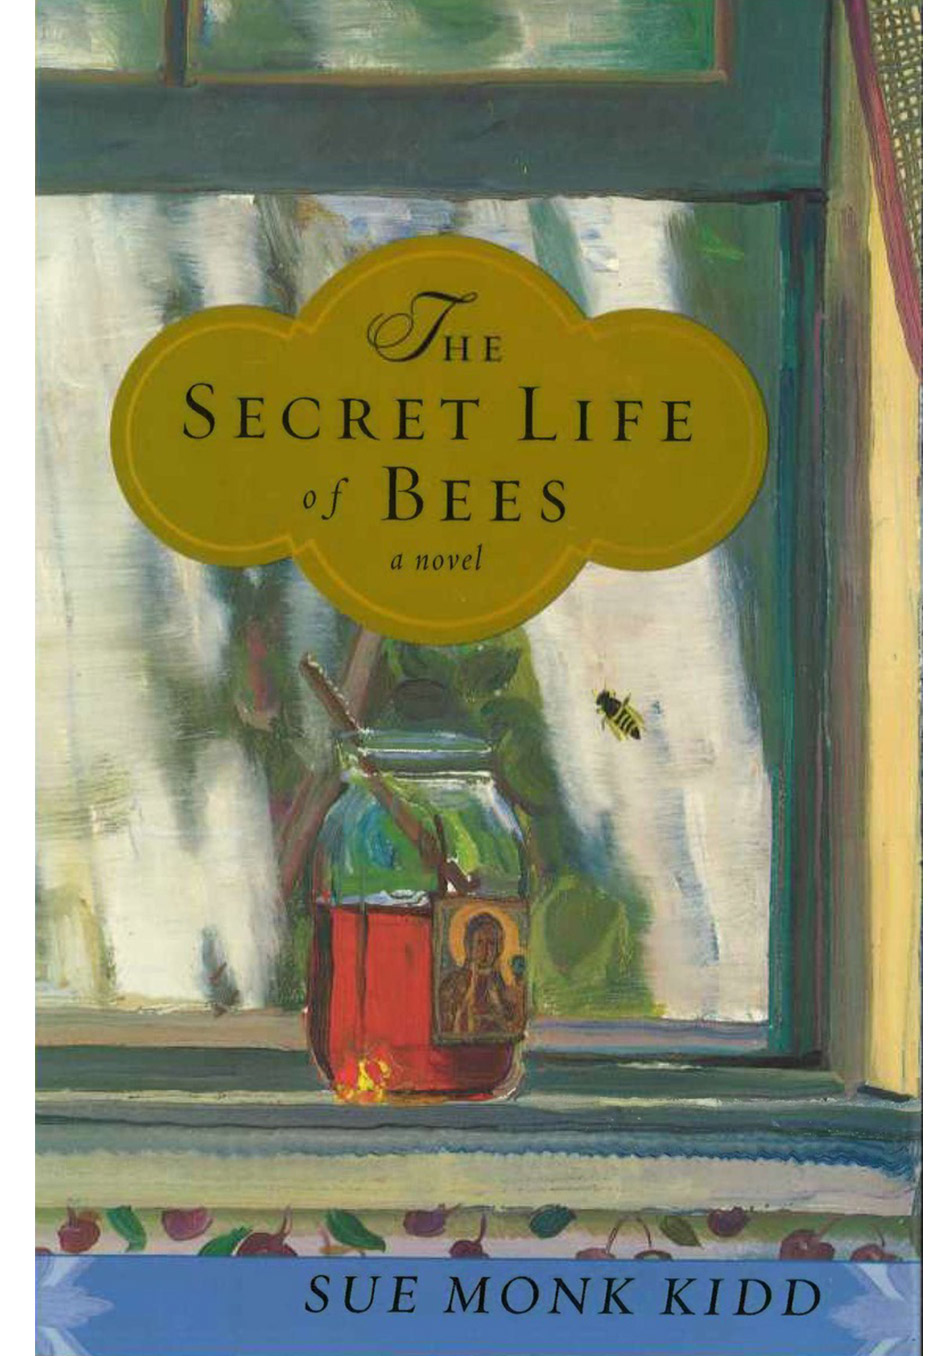 Books That Defined a Generation - The Secret Life of Bees